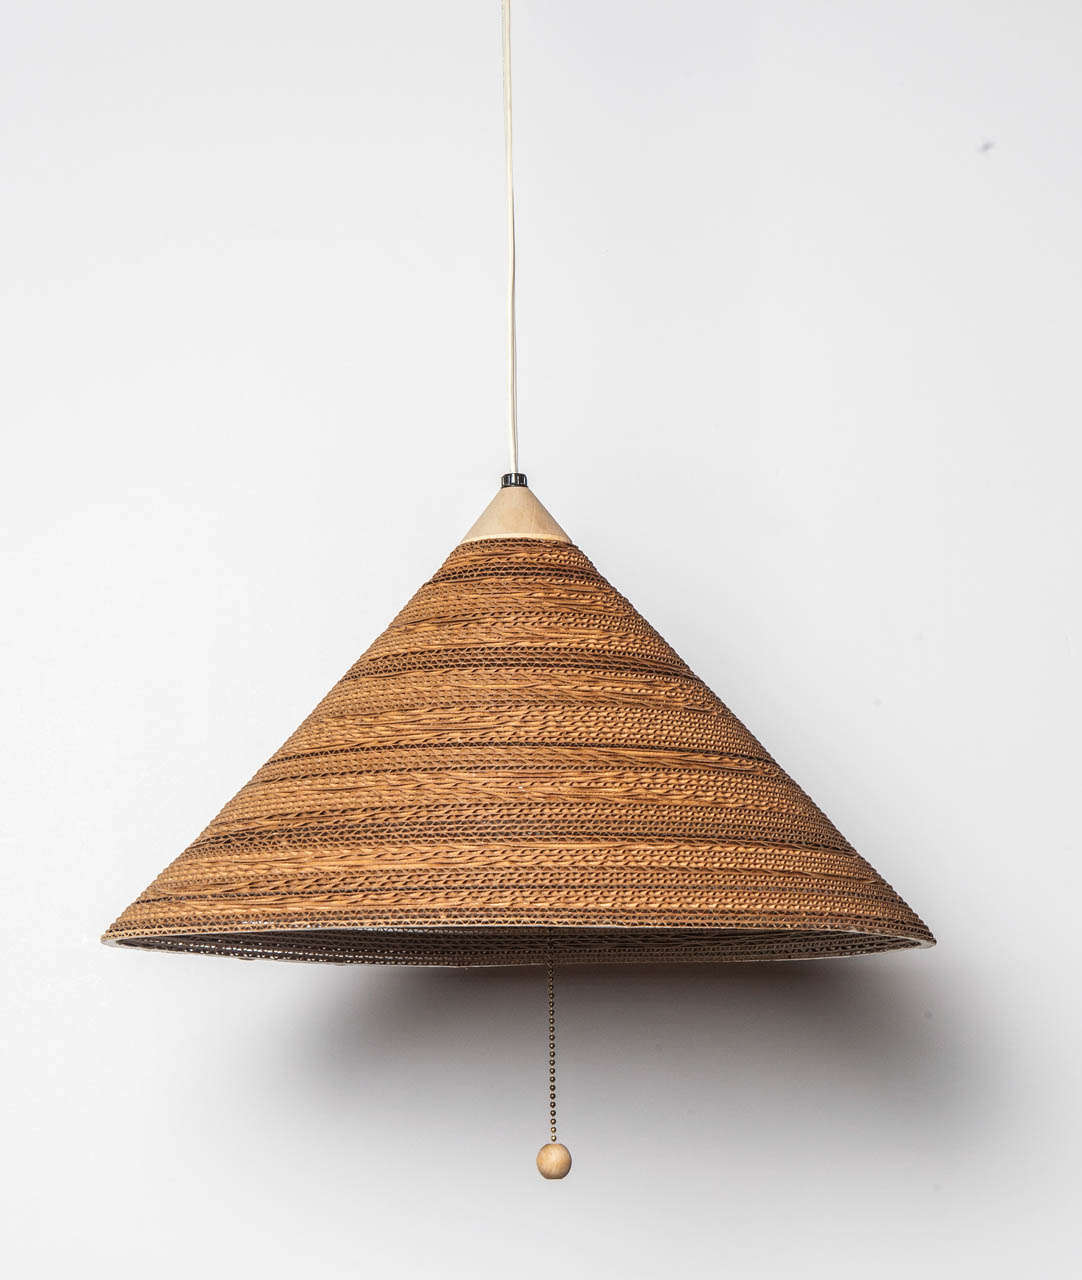 Gregory Van Pelt stacked and laminated cardboard hanging fixture.